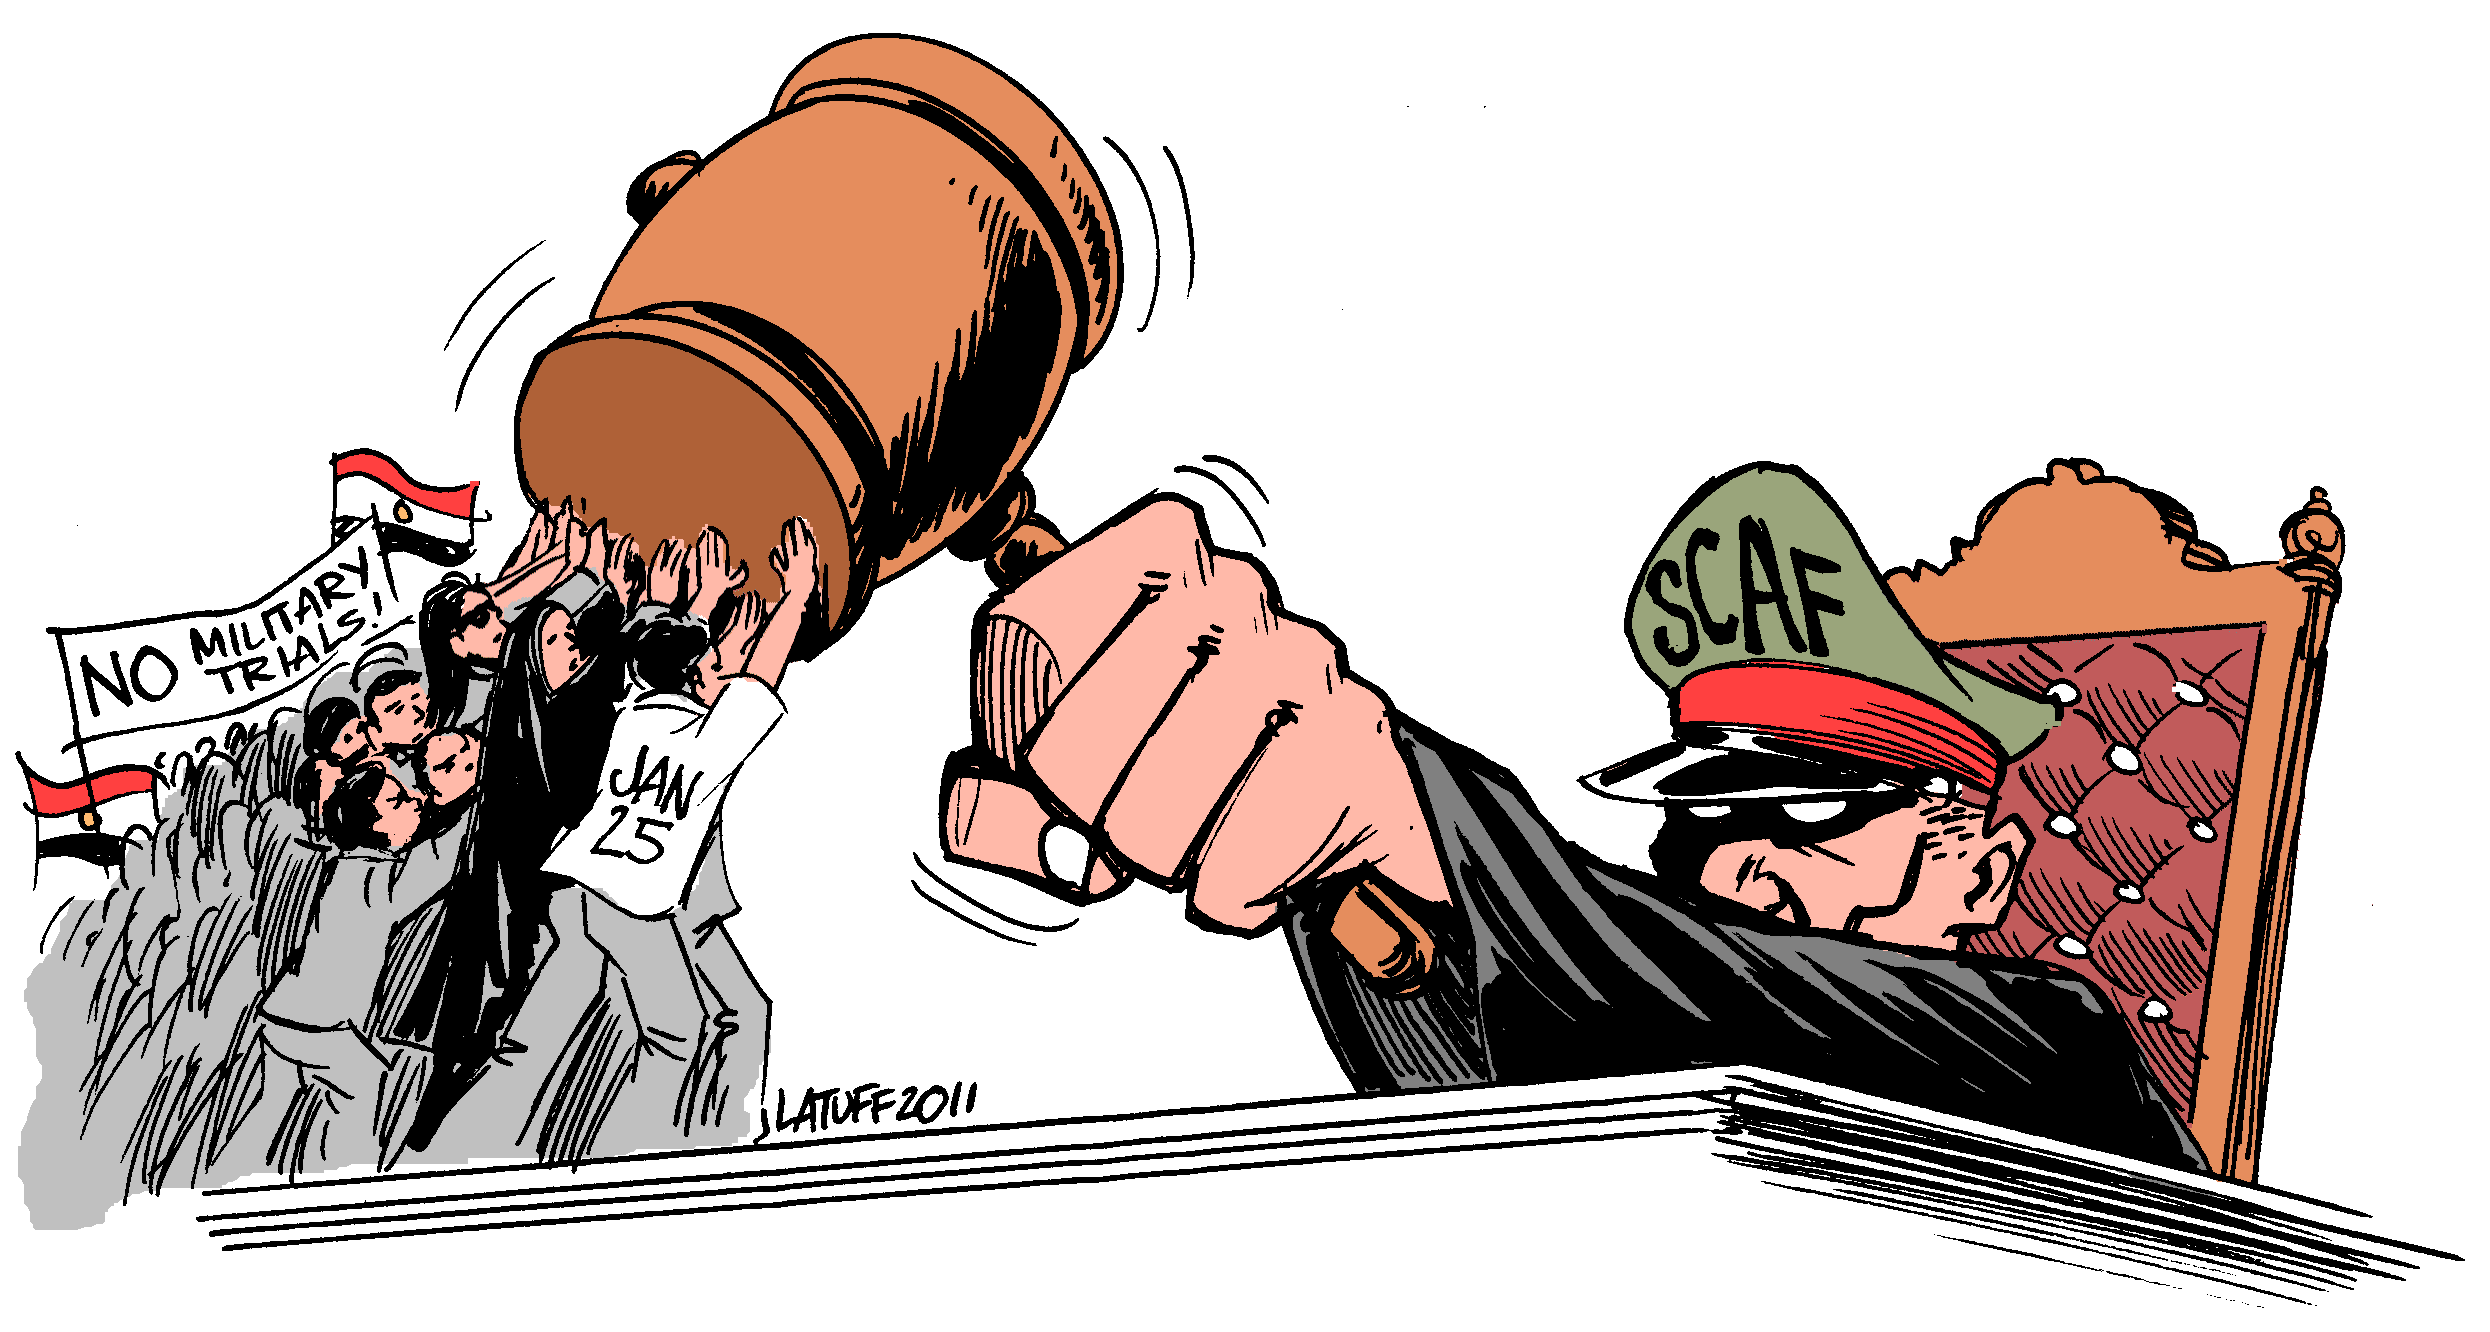 No to Military Trials in Egypt